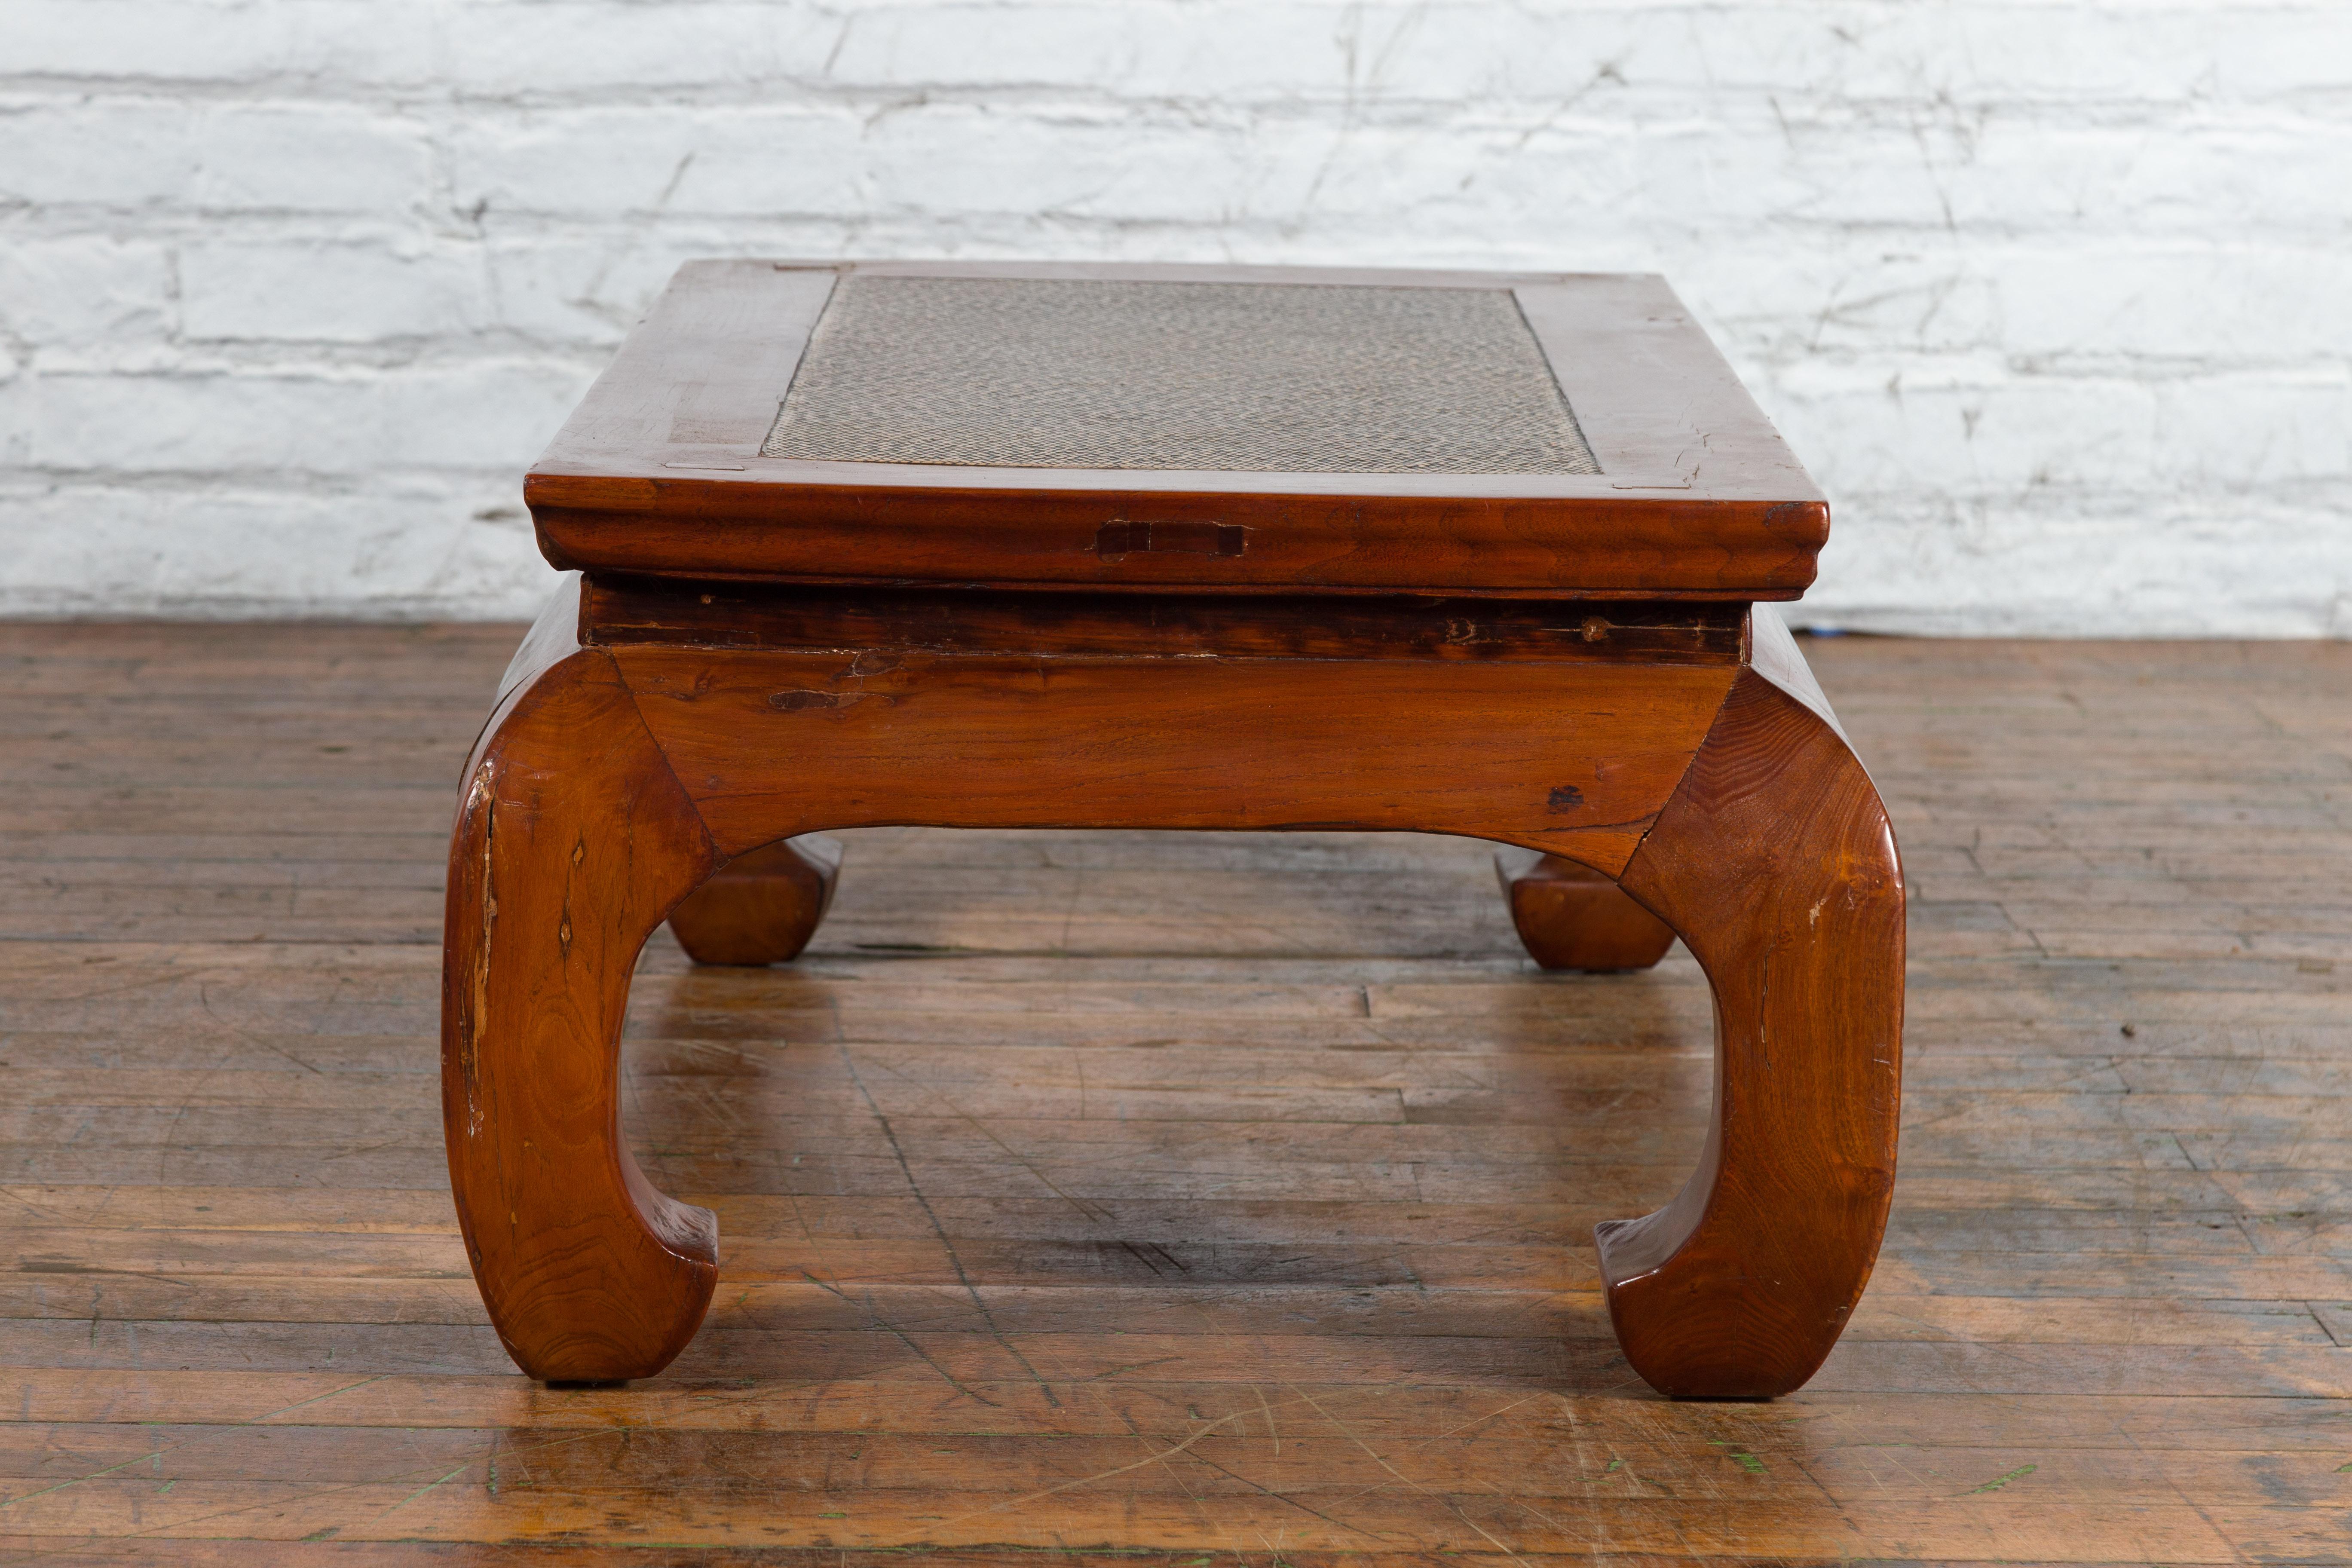 Chinese 19th Century Qing Dynasty Coffee Table with Rattan Top and Chow Legs For Sale 9